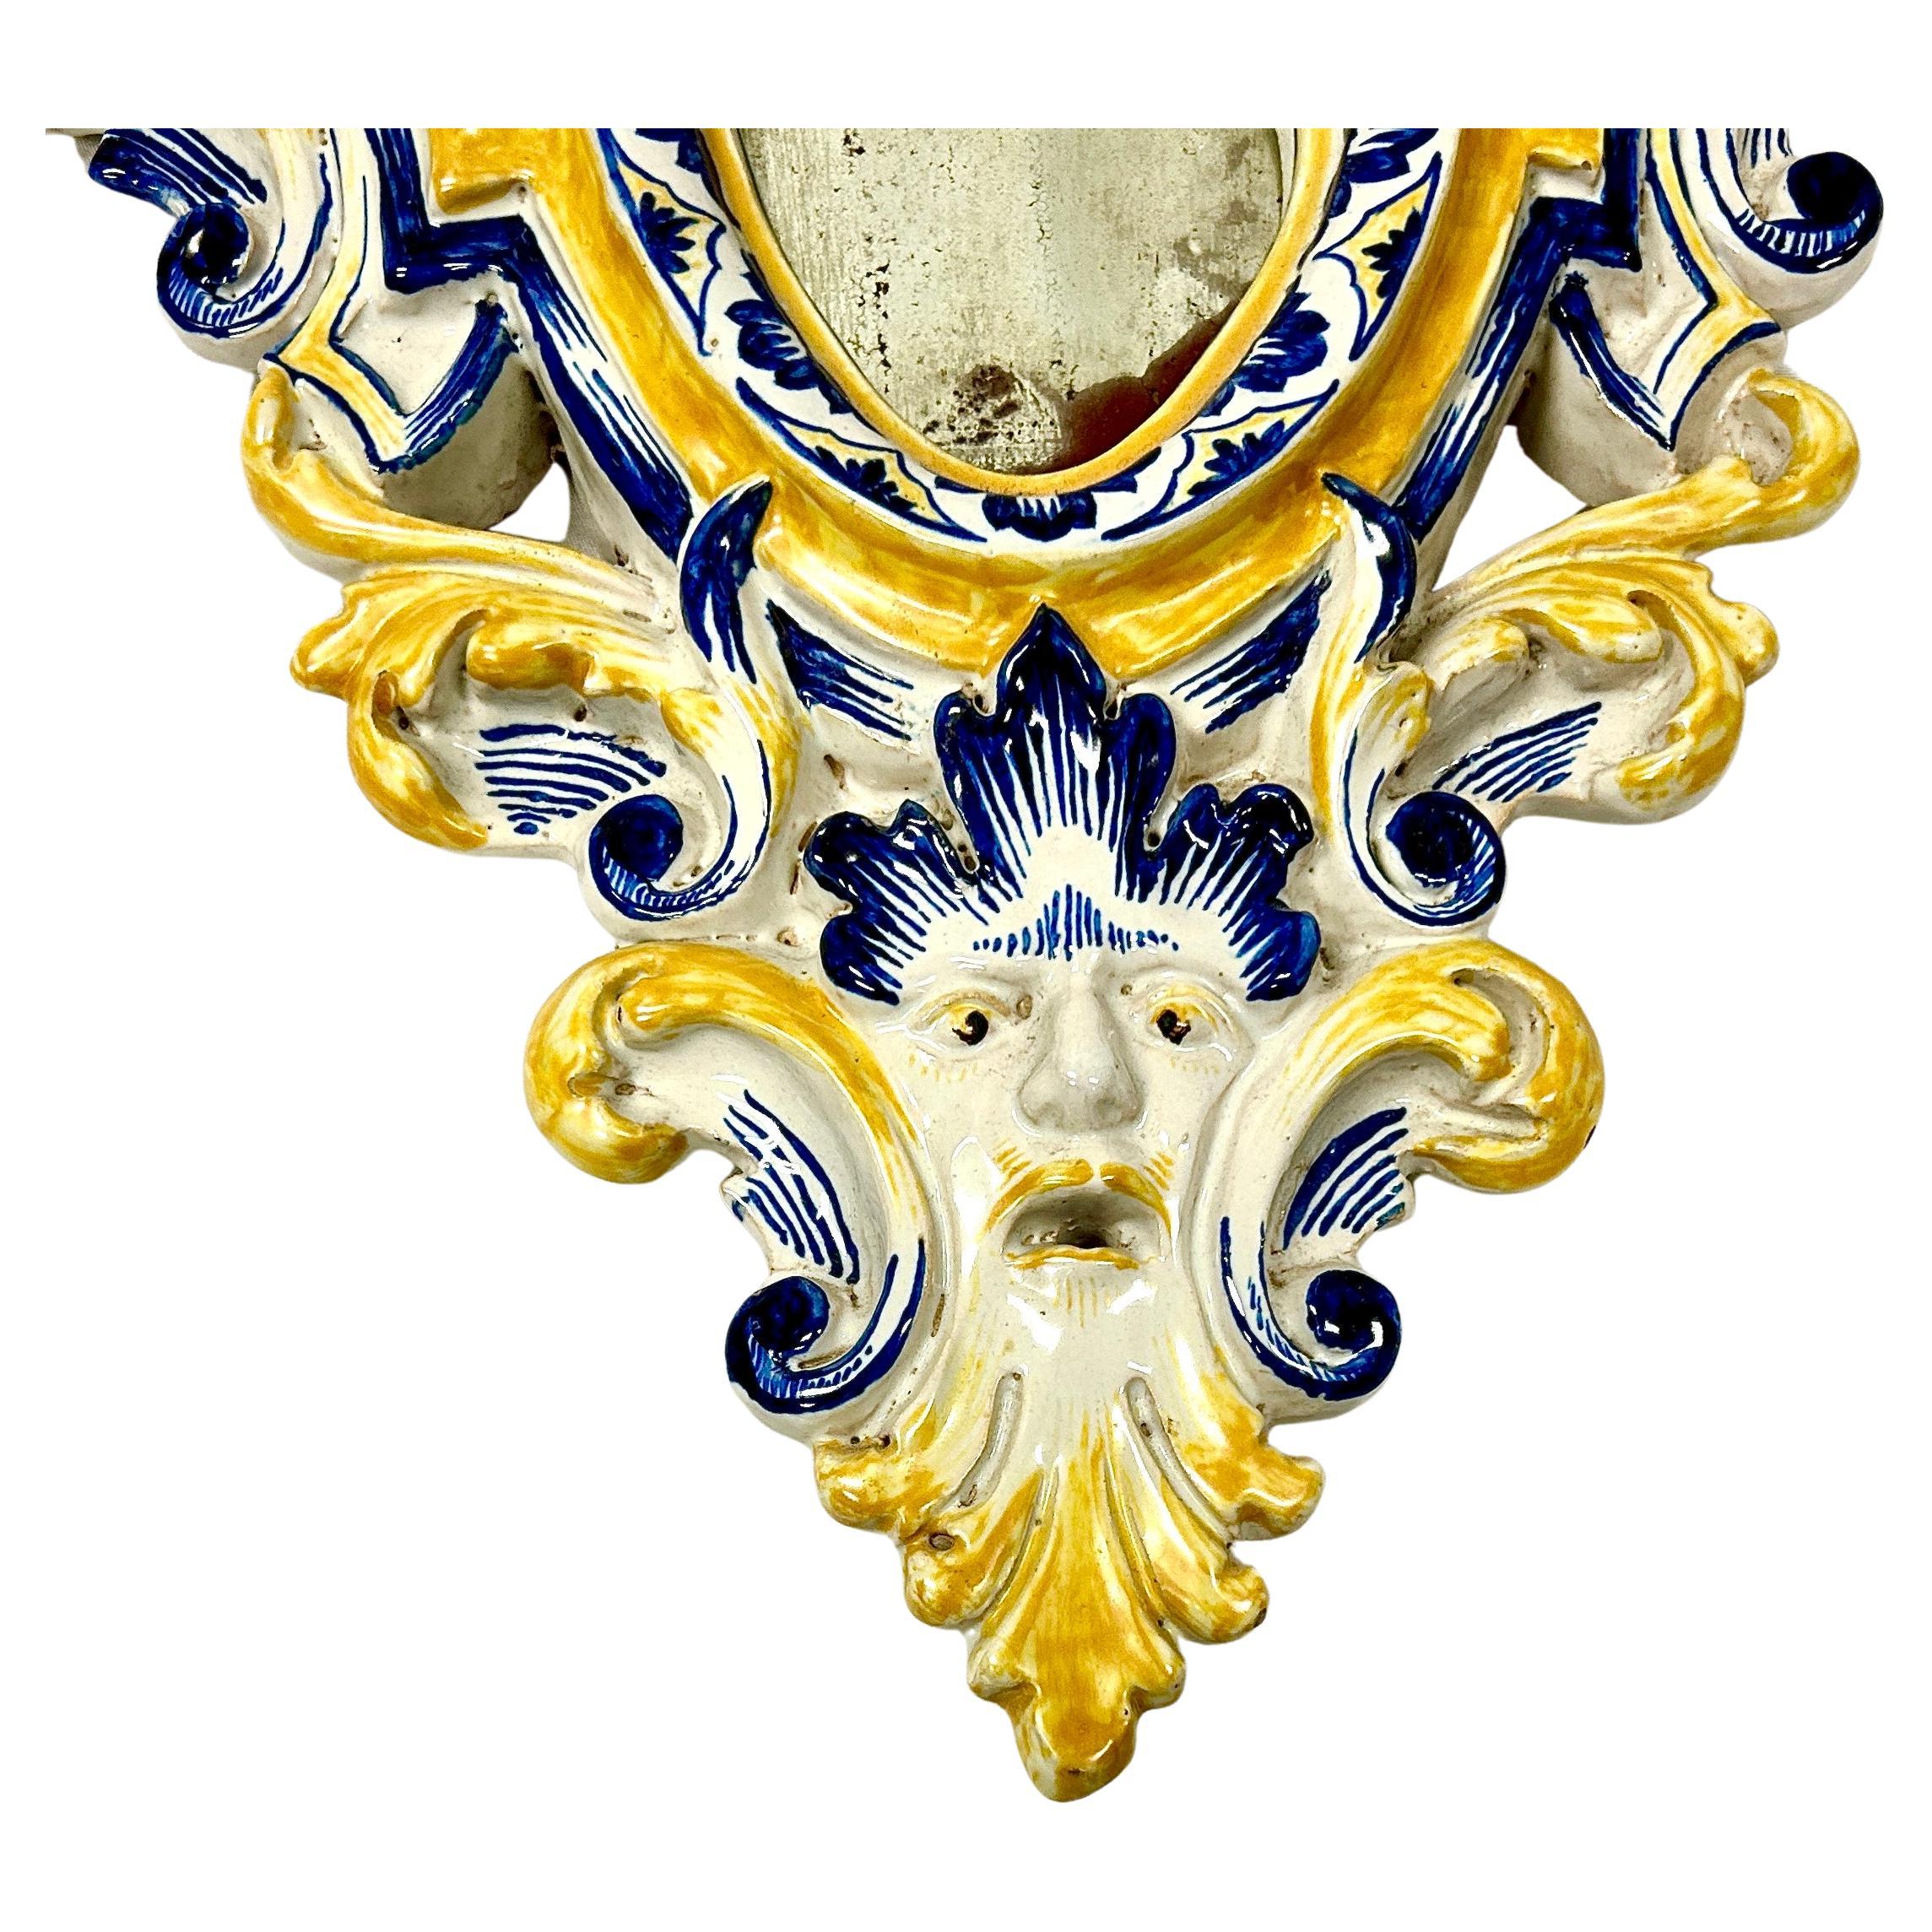 Fine pair of 19th century baroque Italian Majolica glazed mirrors. Mirrors are hand- made featuring colors of white, yellow and blue with carved edges, each molded with a bearded mask and painted with flower-sprays,
